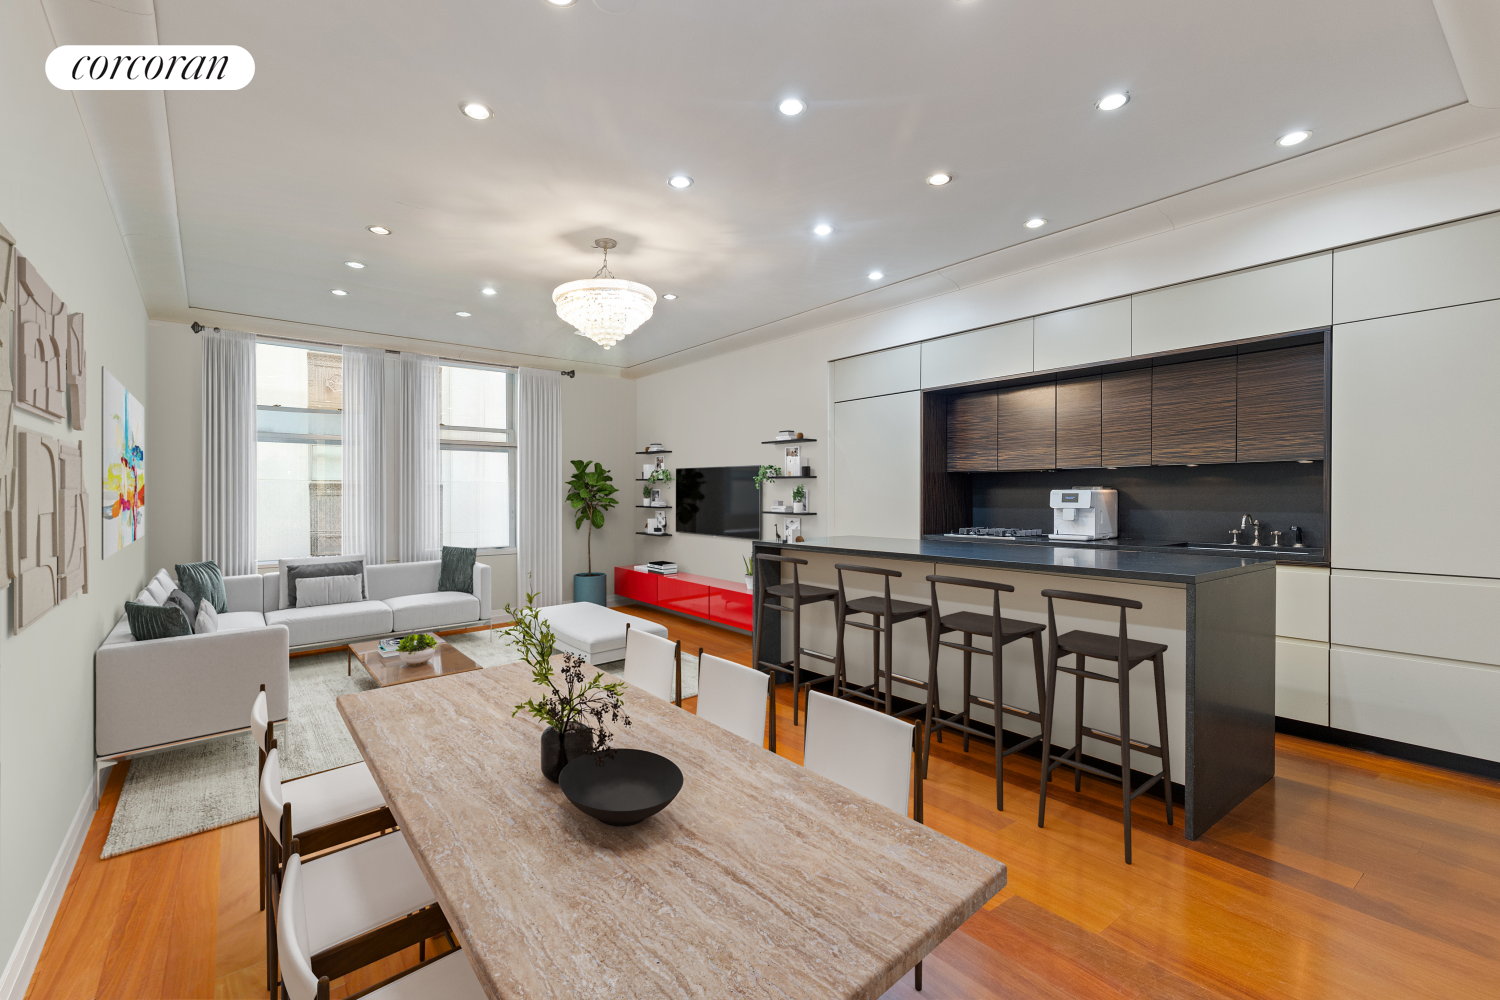 55 Wall Street 530, Financial District, Downtown, NYC - 3 Bedrooms  
3.5 Bathrooms  
4 Rooms - 